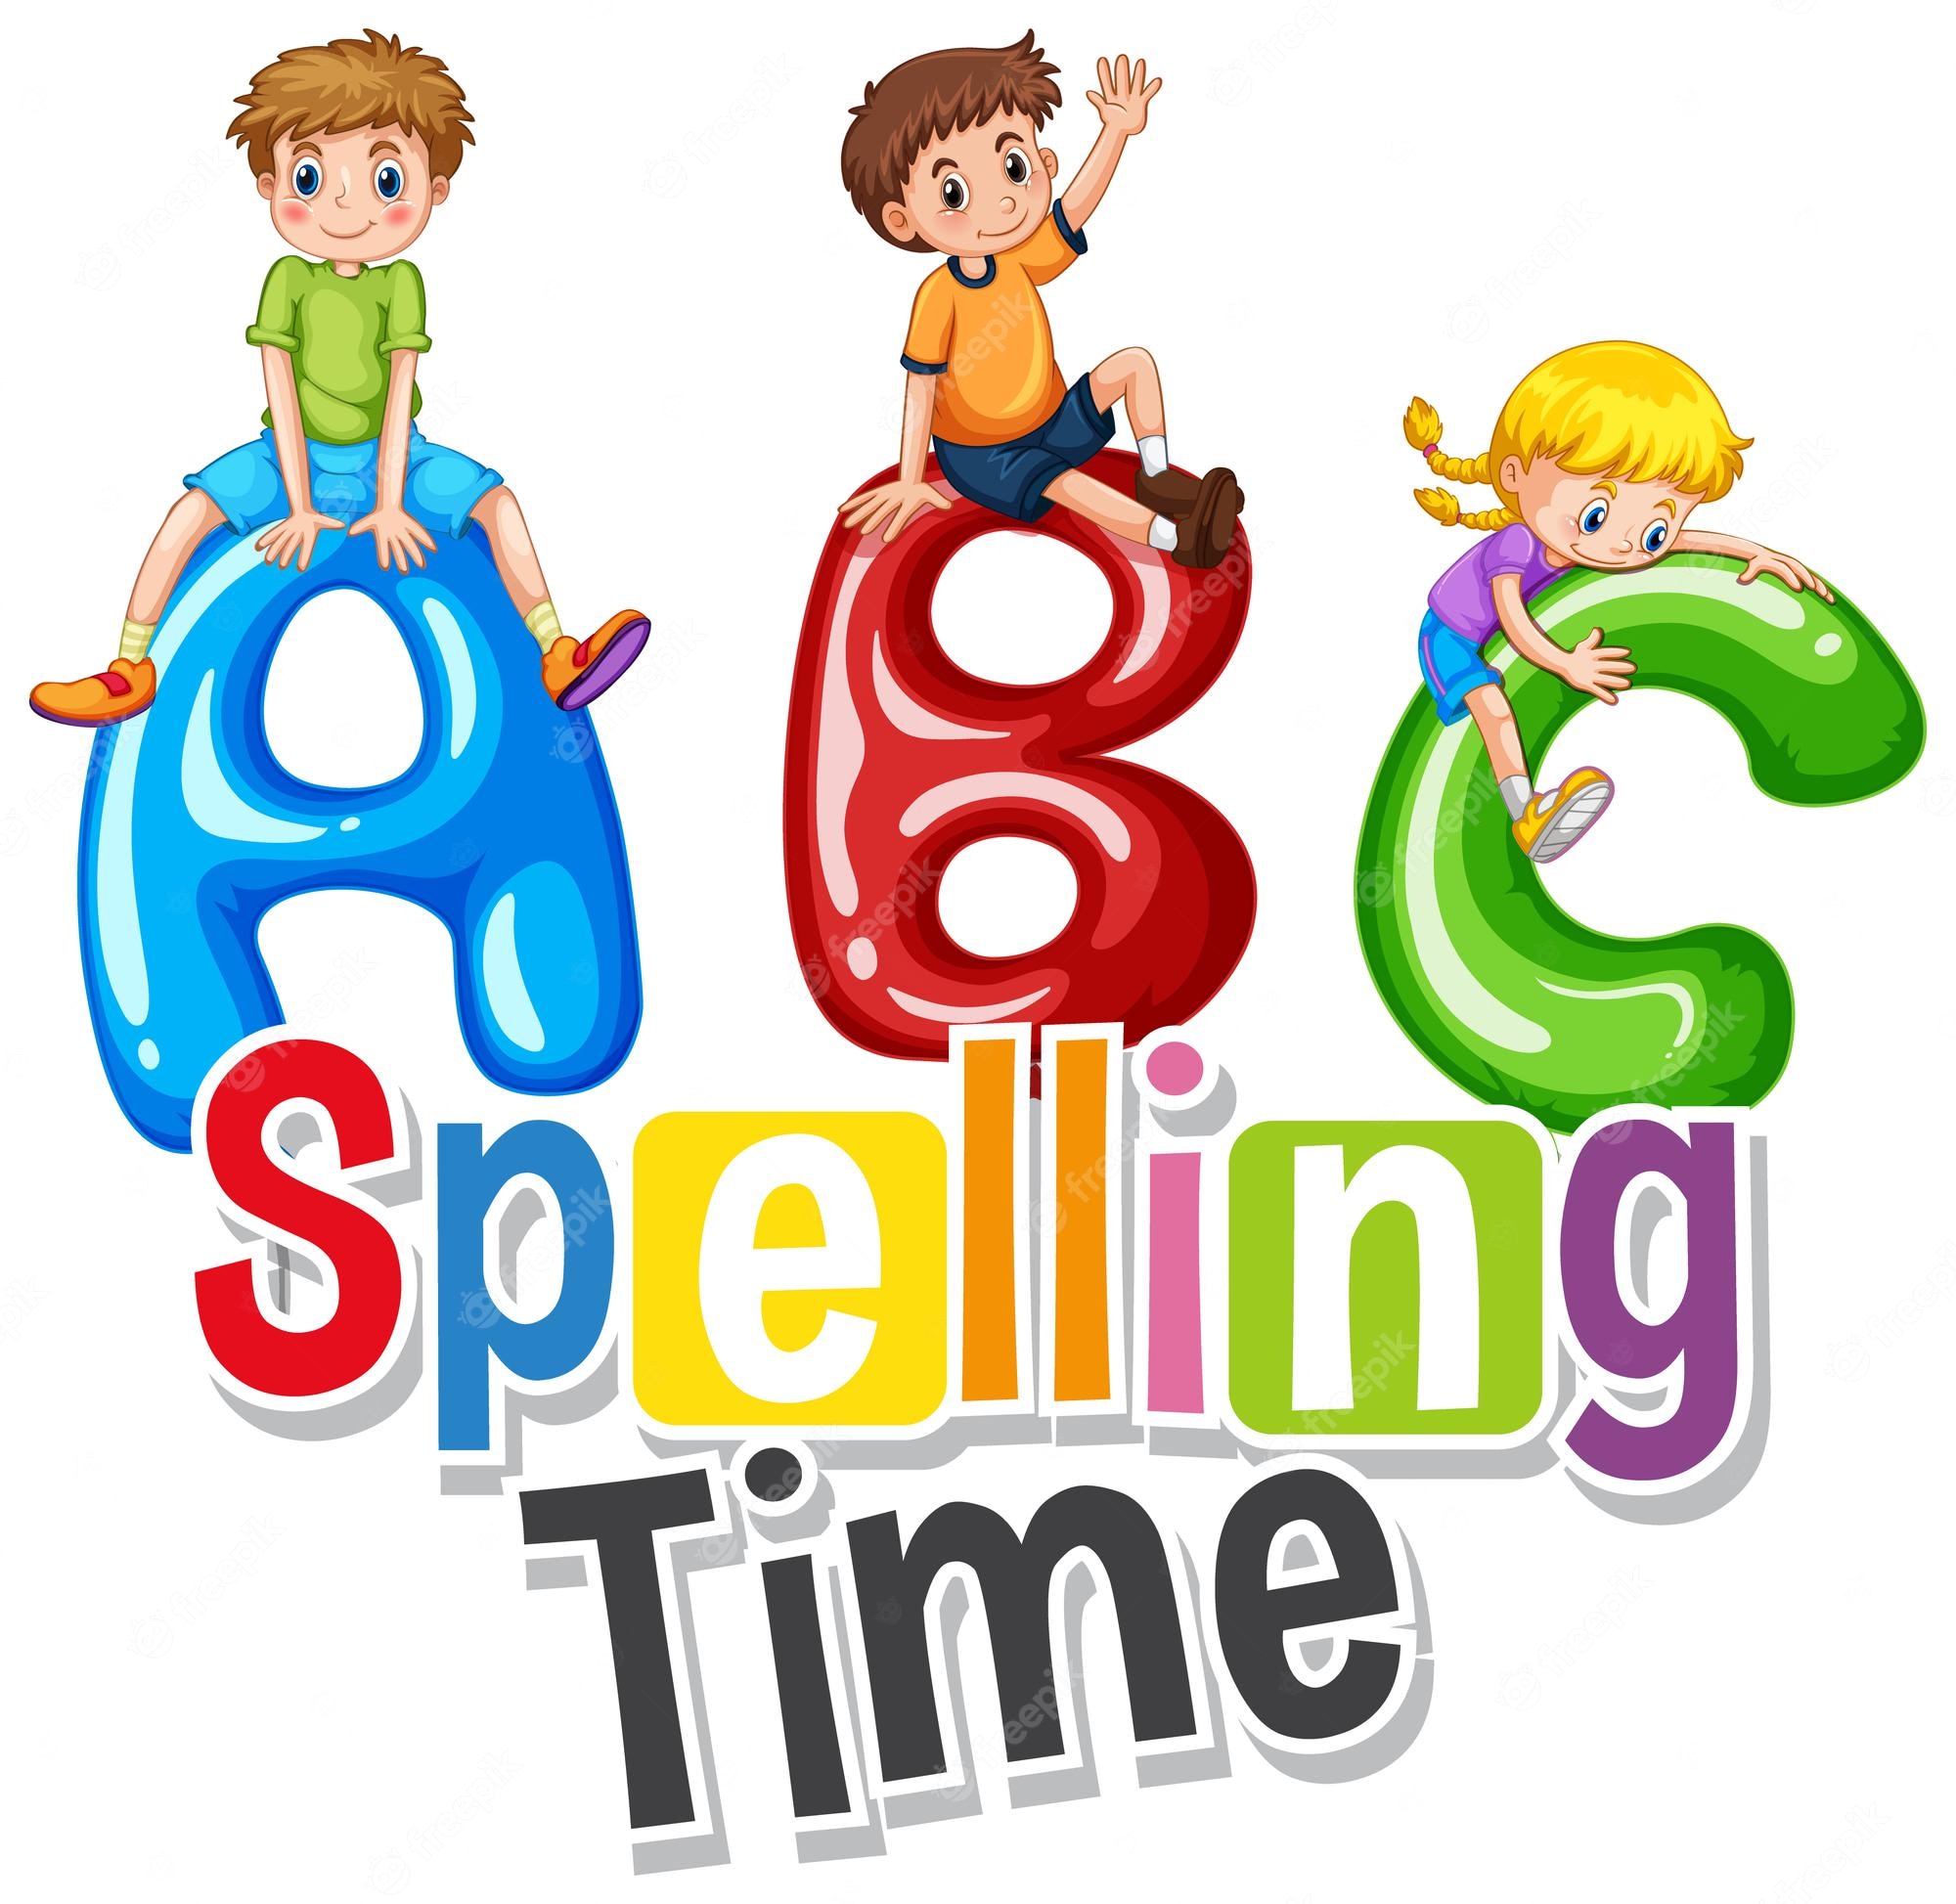 Free Spelling Homework Cliparts, Download Free Spelling Homework - Clip ...